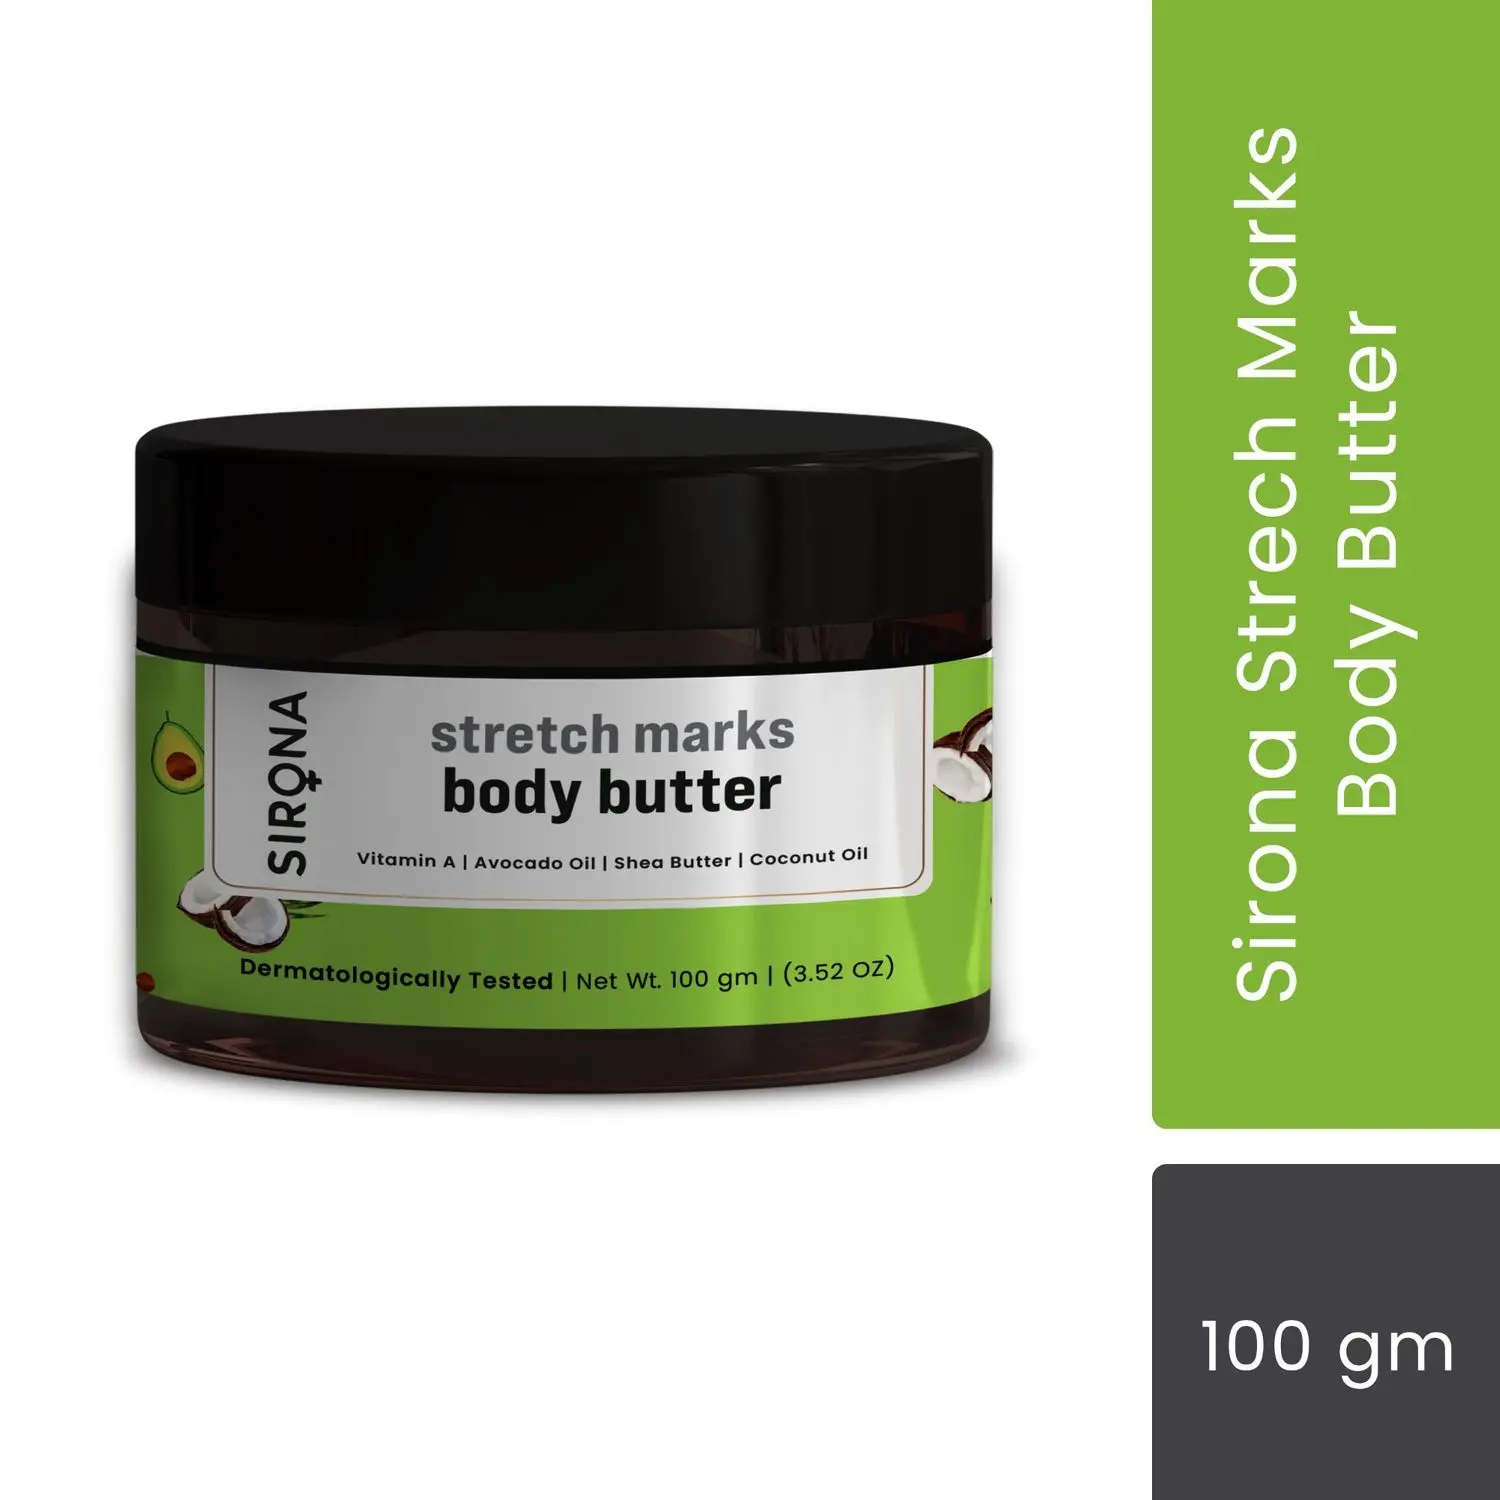 Sirona stretch marks Body Butter for Reduces Stretch Marks, Smoothes itchiness & prevents moisture loss with Vitamin A, Avocado Oil, Shea Butter & Coconut Oil - 100gm